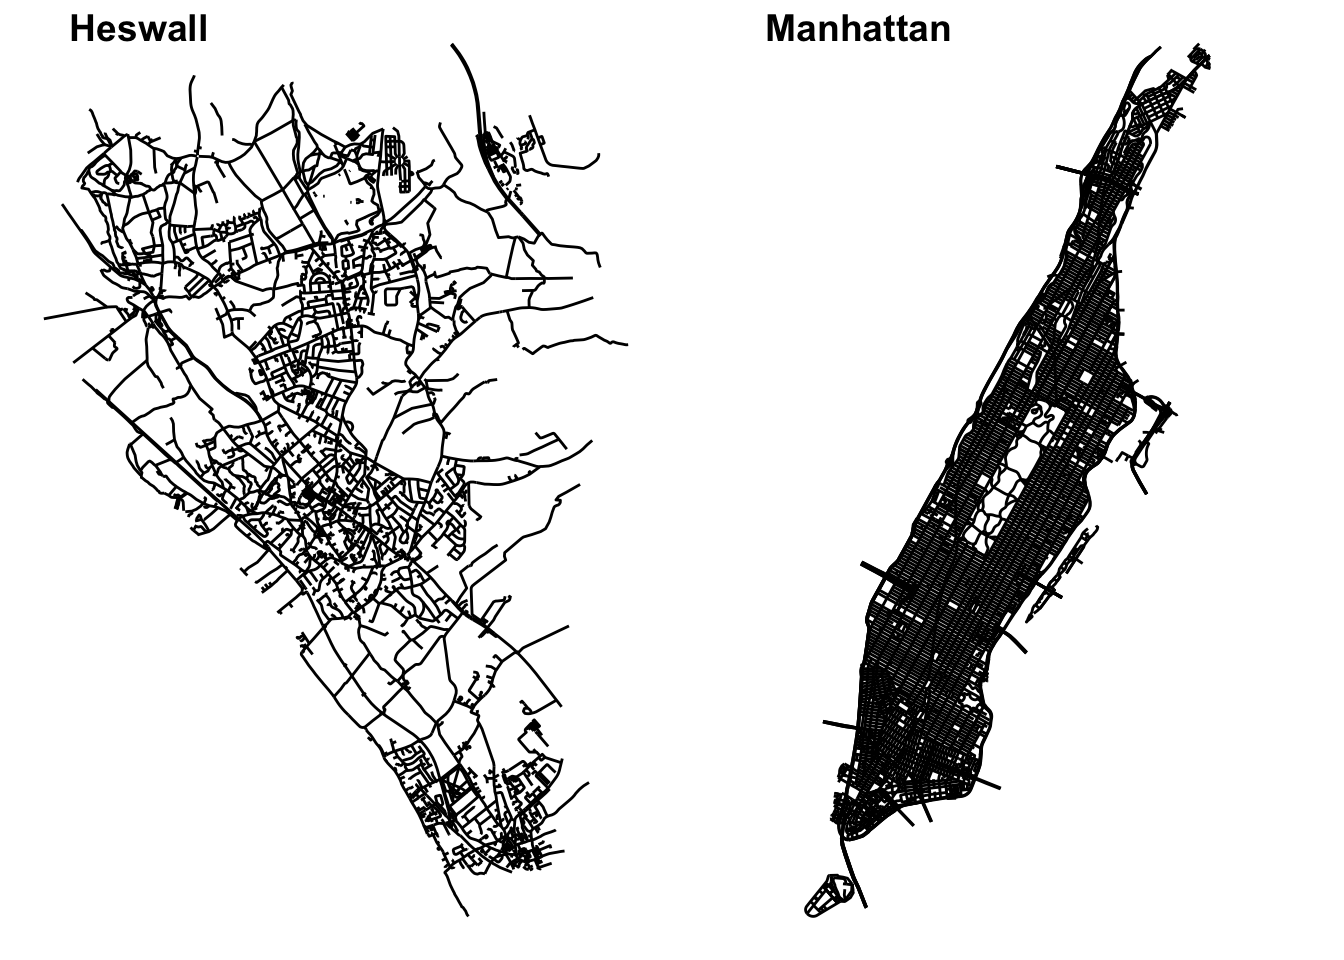 Two simple street maps side by side, the first titled 'Heswall', and the second 'Manhattan'. Black lines trace out the road network in both maps. Details of the roads are relatively clear in Heswall, but bleed together and cannot be made out in Manhattan.